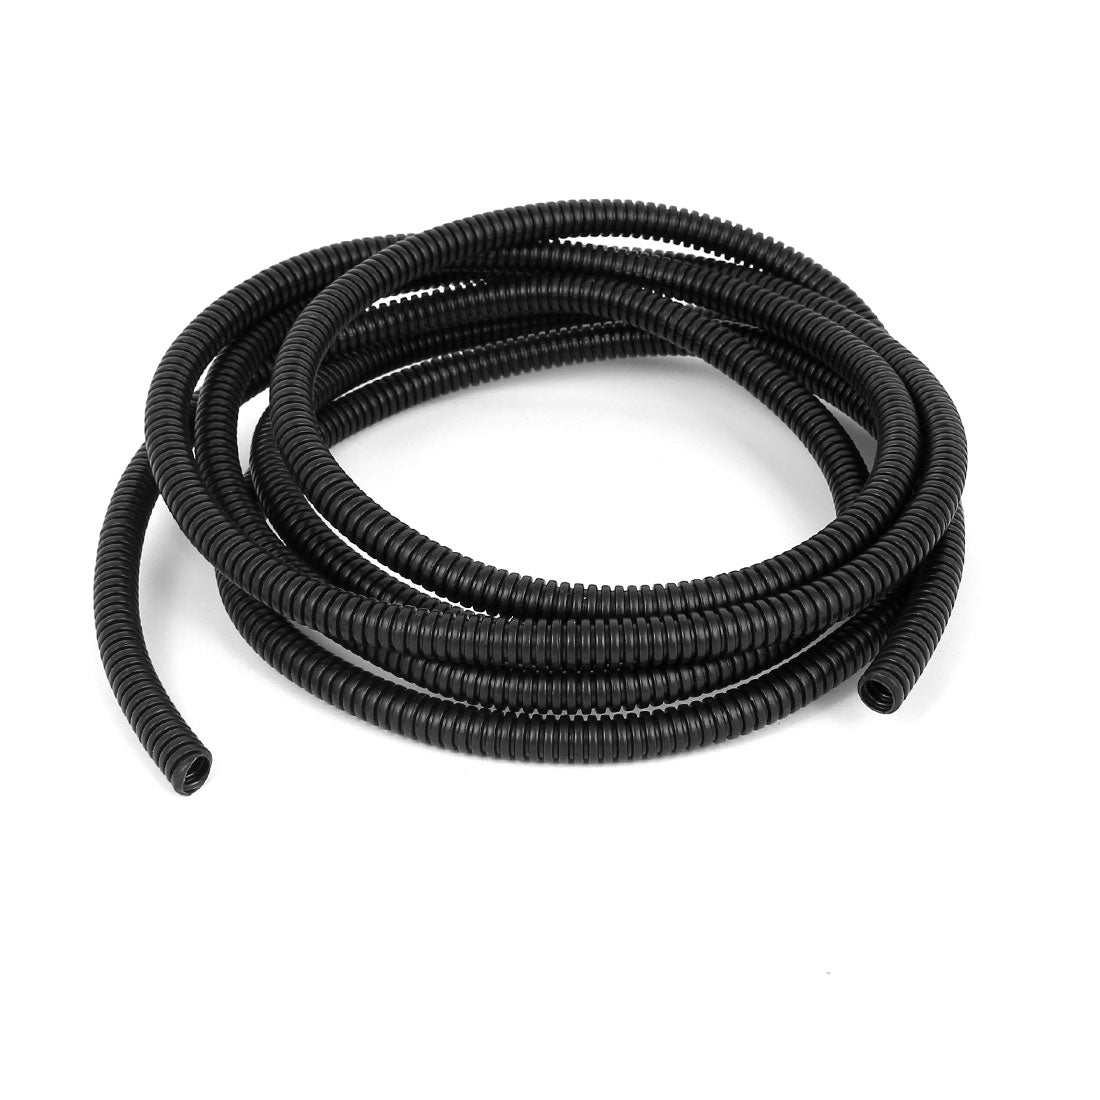 uxcell Uxcell 2.97 M 7 x 10 mm Plastic Corrugated Conduit Tube for Garden,Office Black